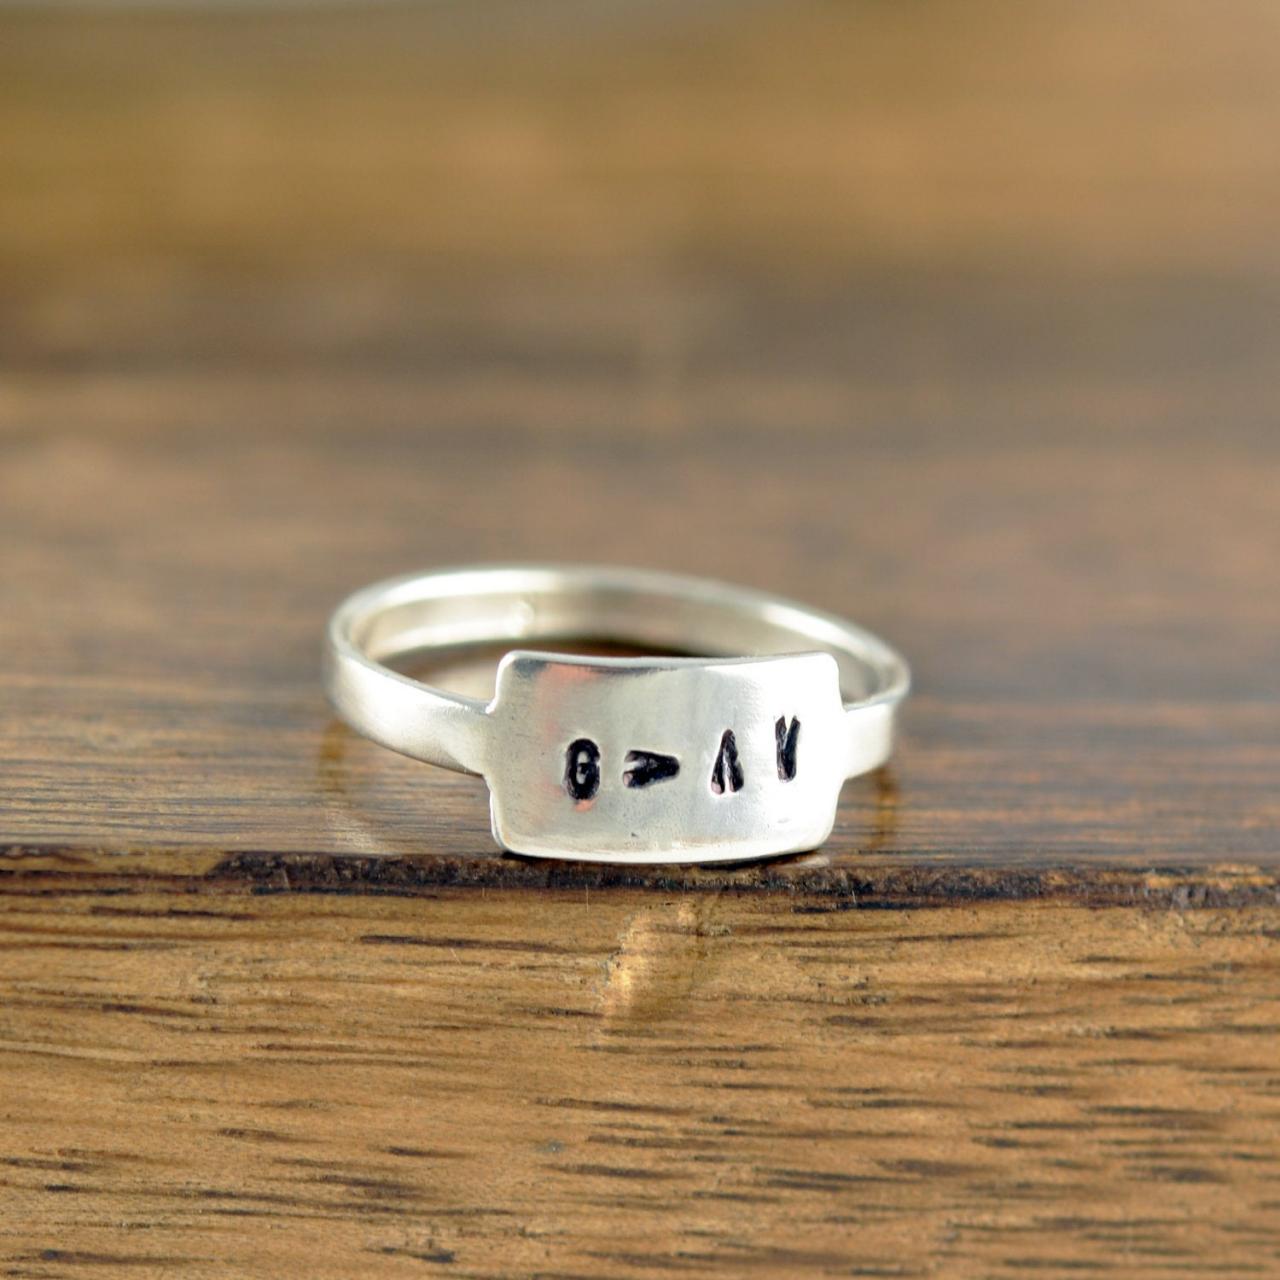 Name Ring, Sterling Silver Ring, Christian Gifts, Inspirational Jewelry, Personalized Ring, Tab Ring, Silver Stacking Rings, Gift For Her